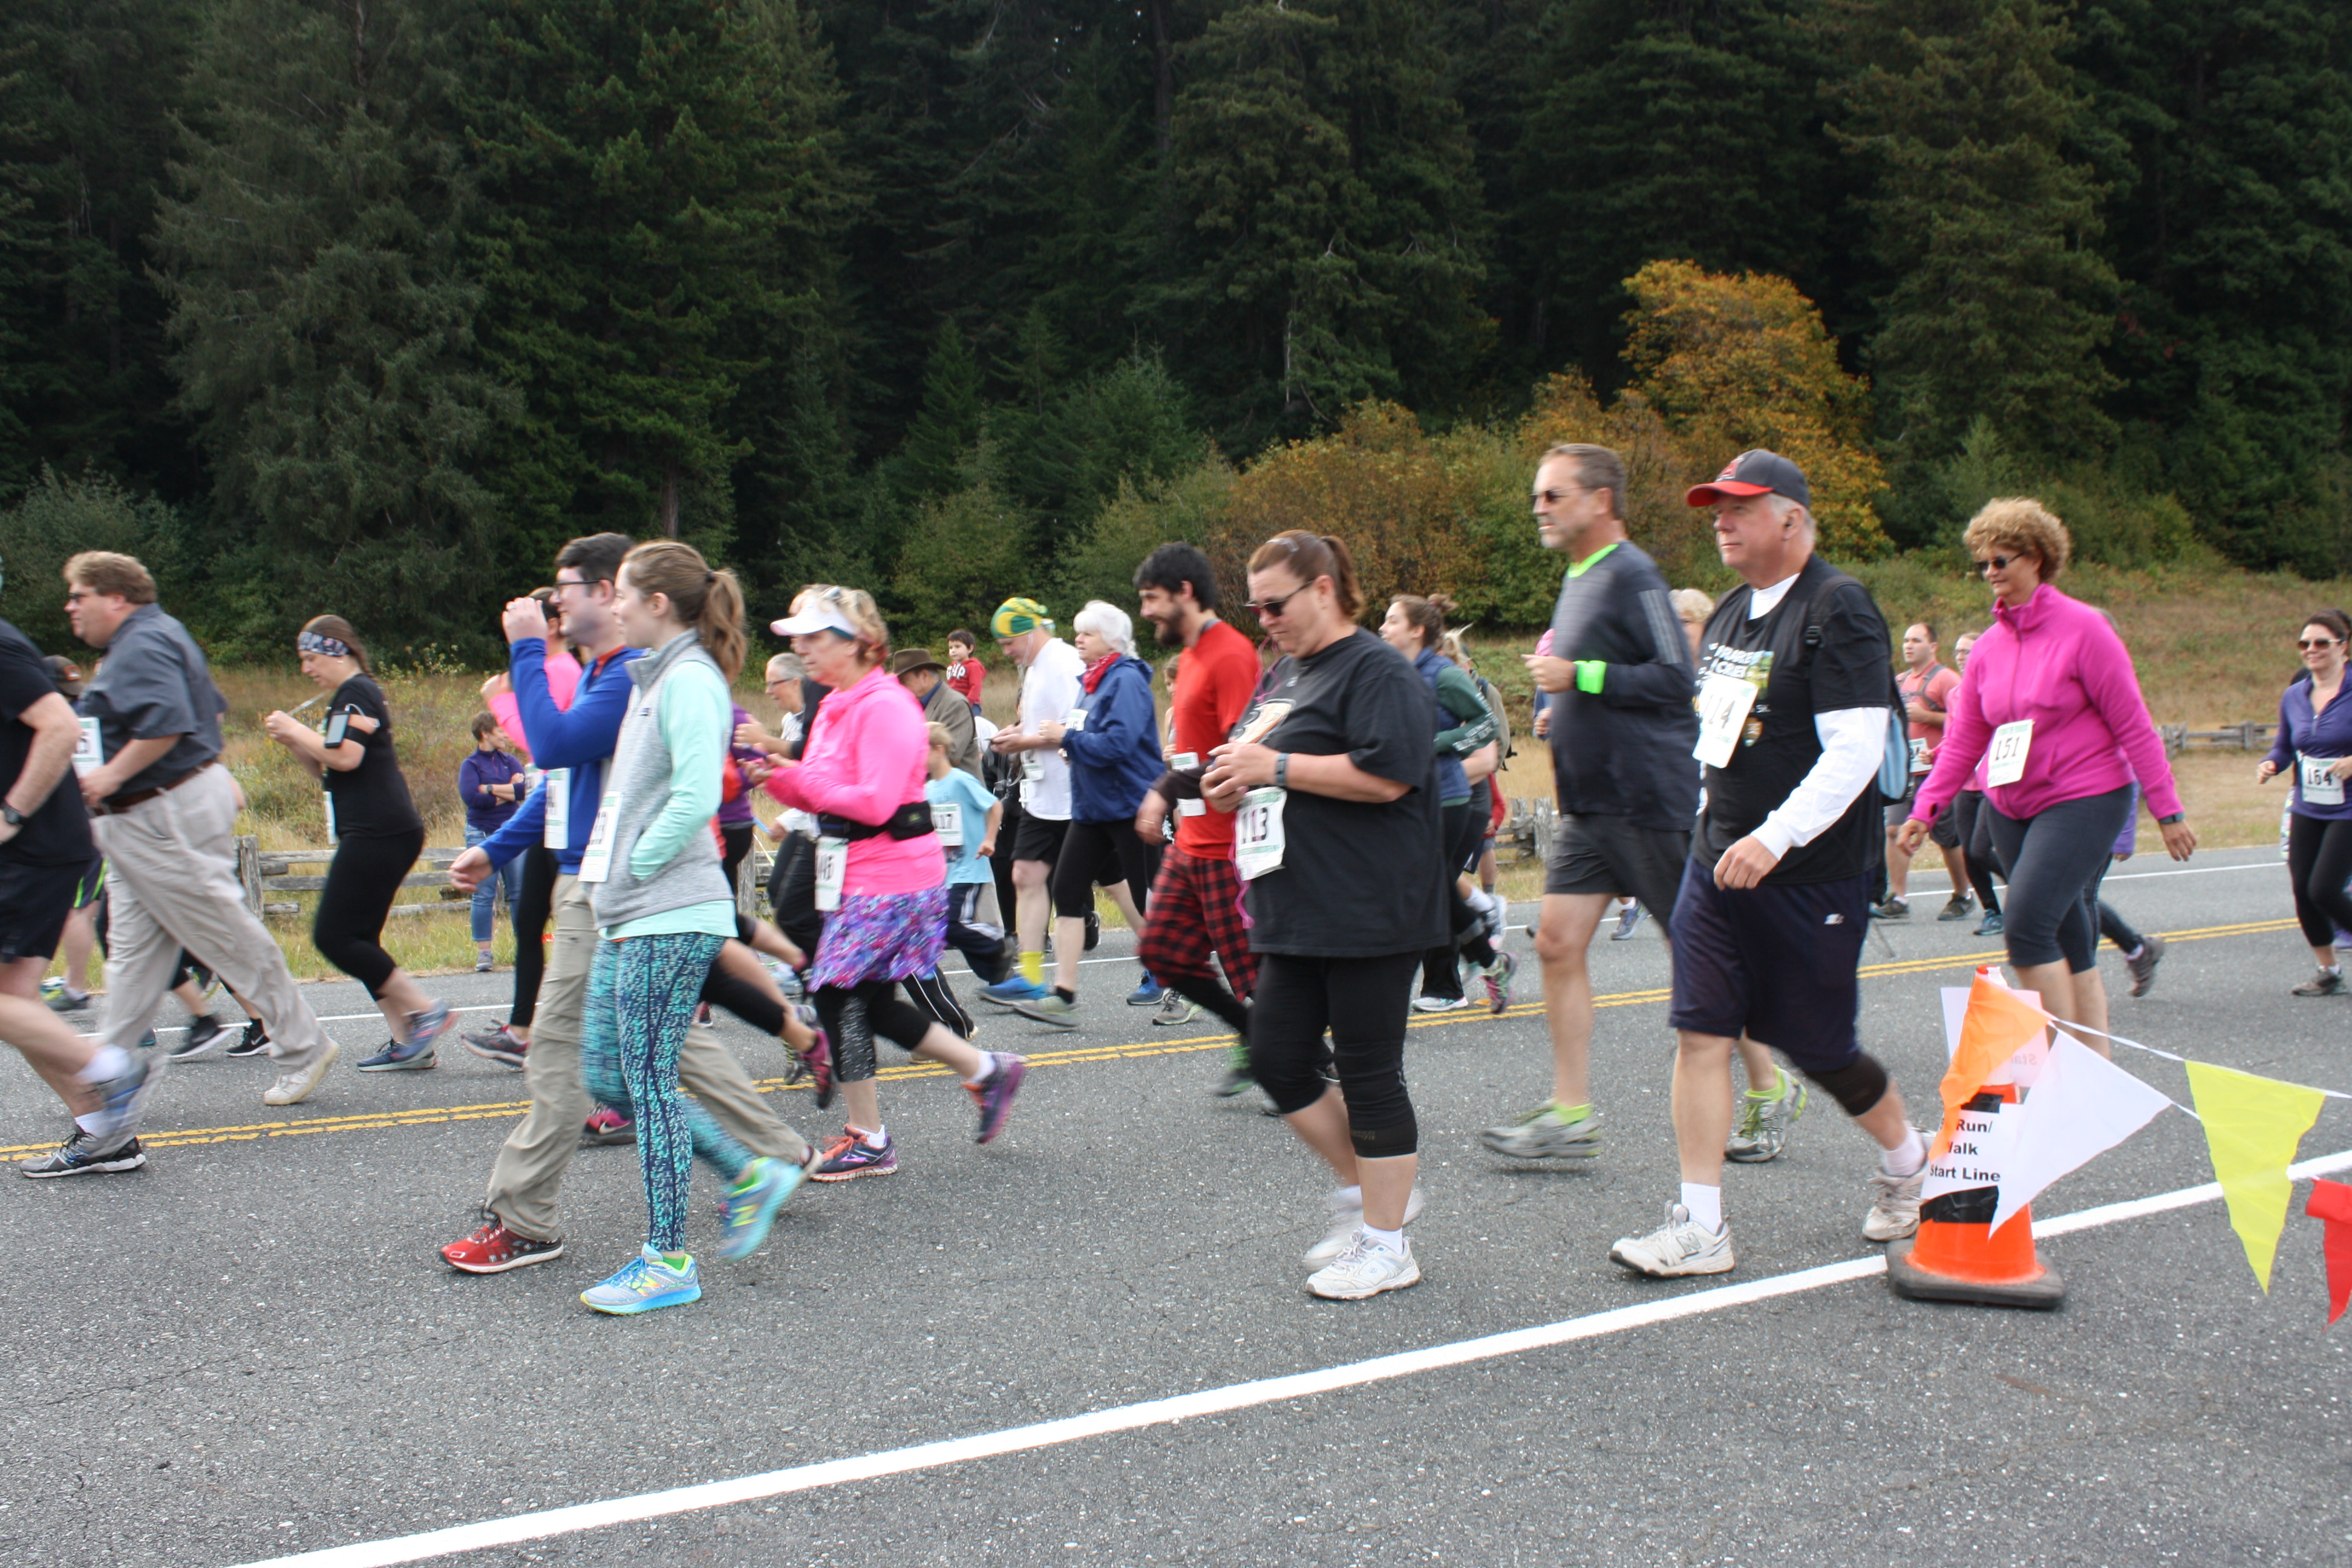 A groups of runners and walkers in the redwoods.